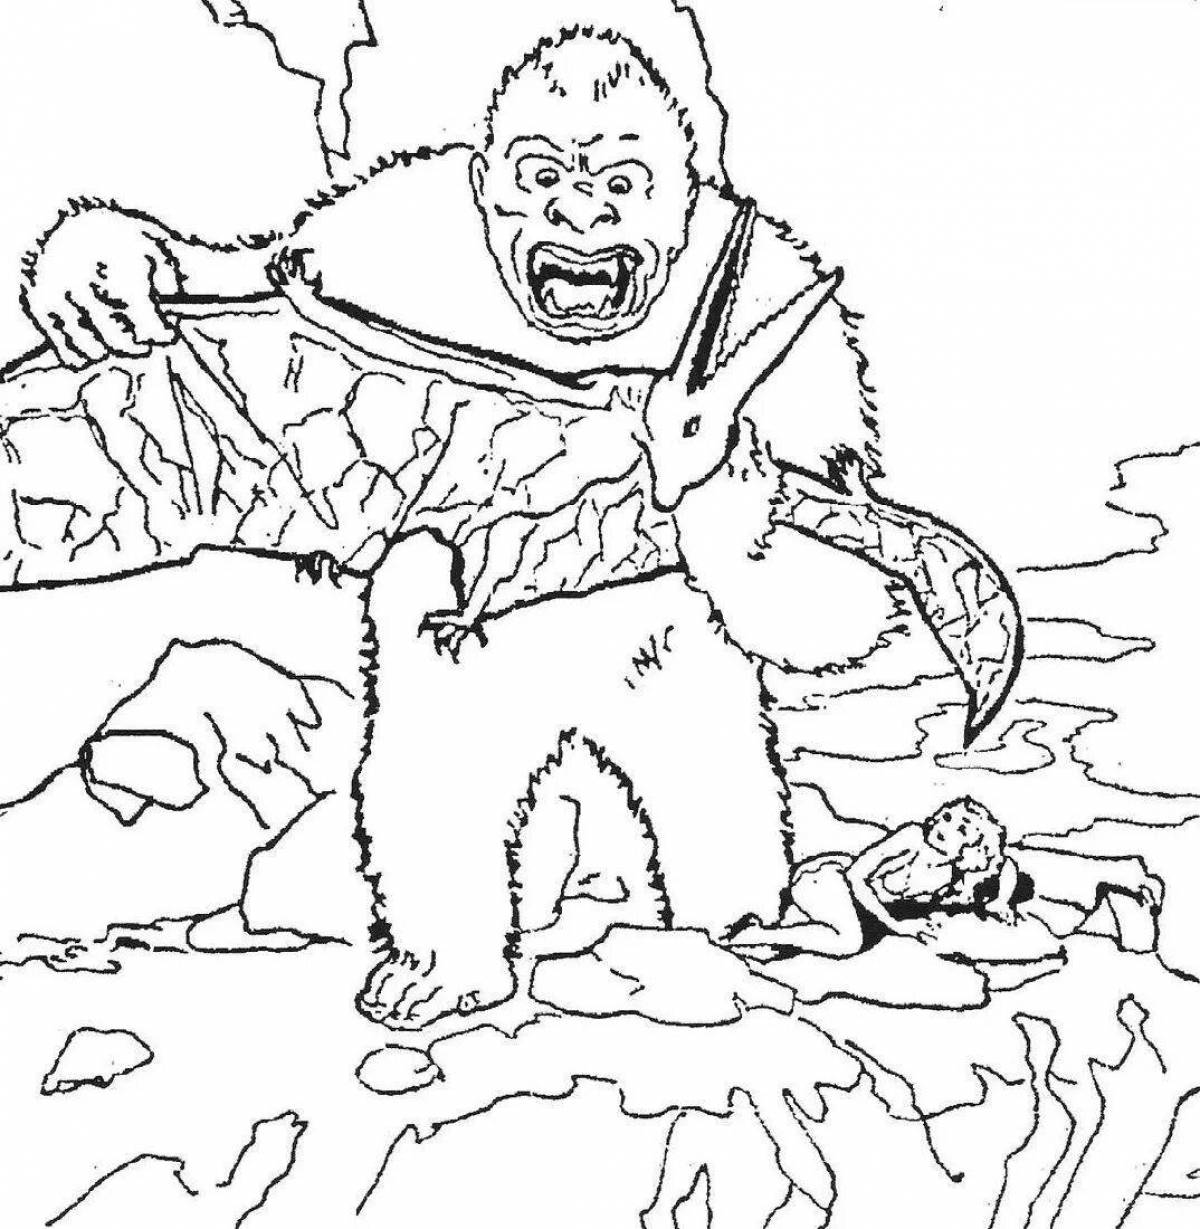 Charming king kong coloring book for kids